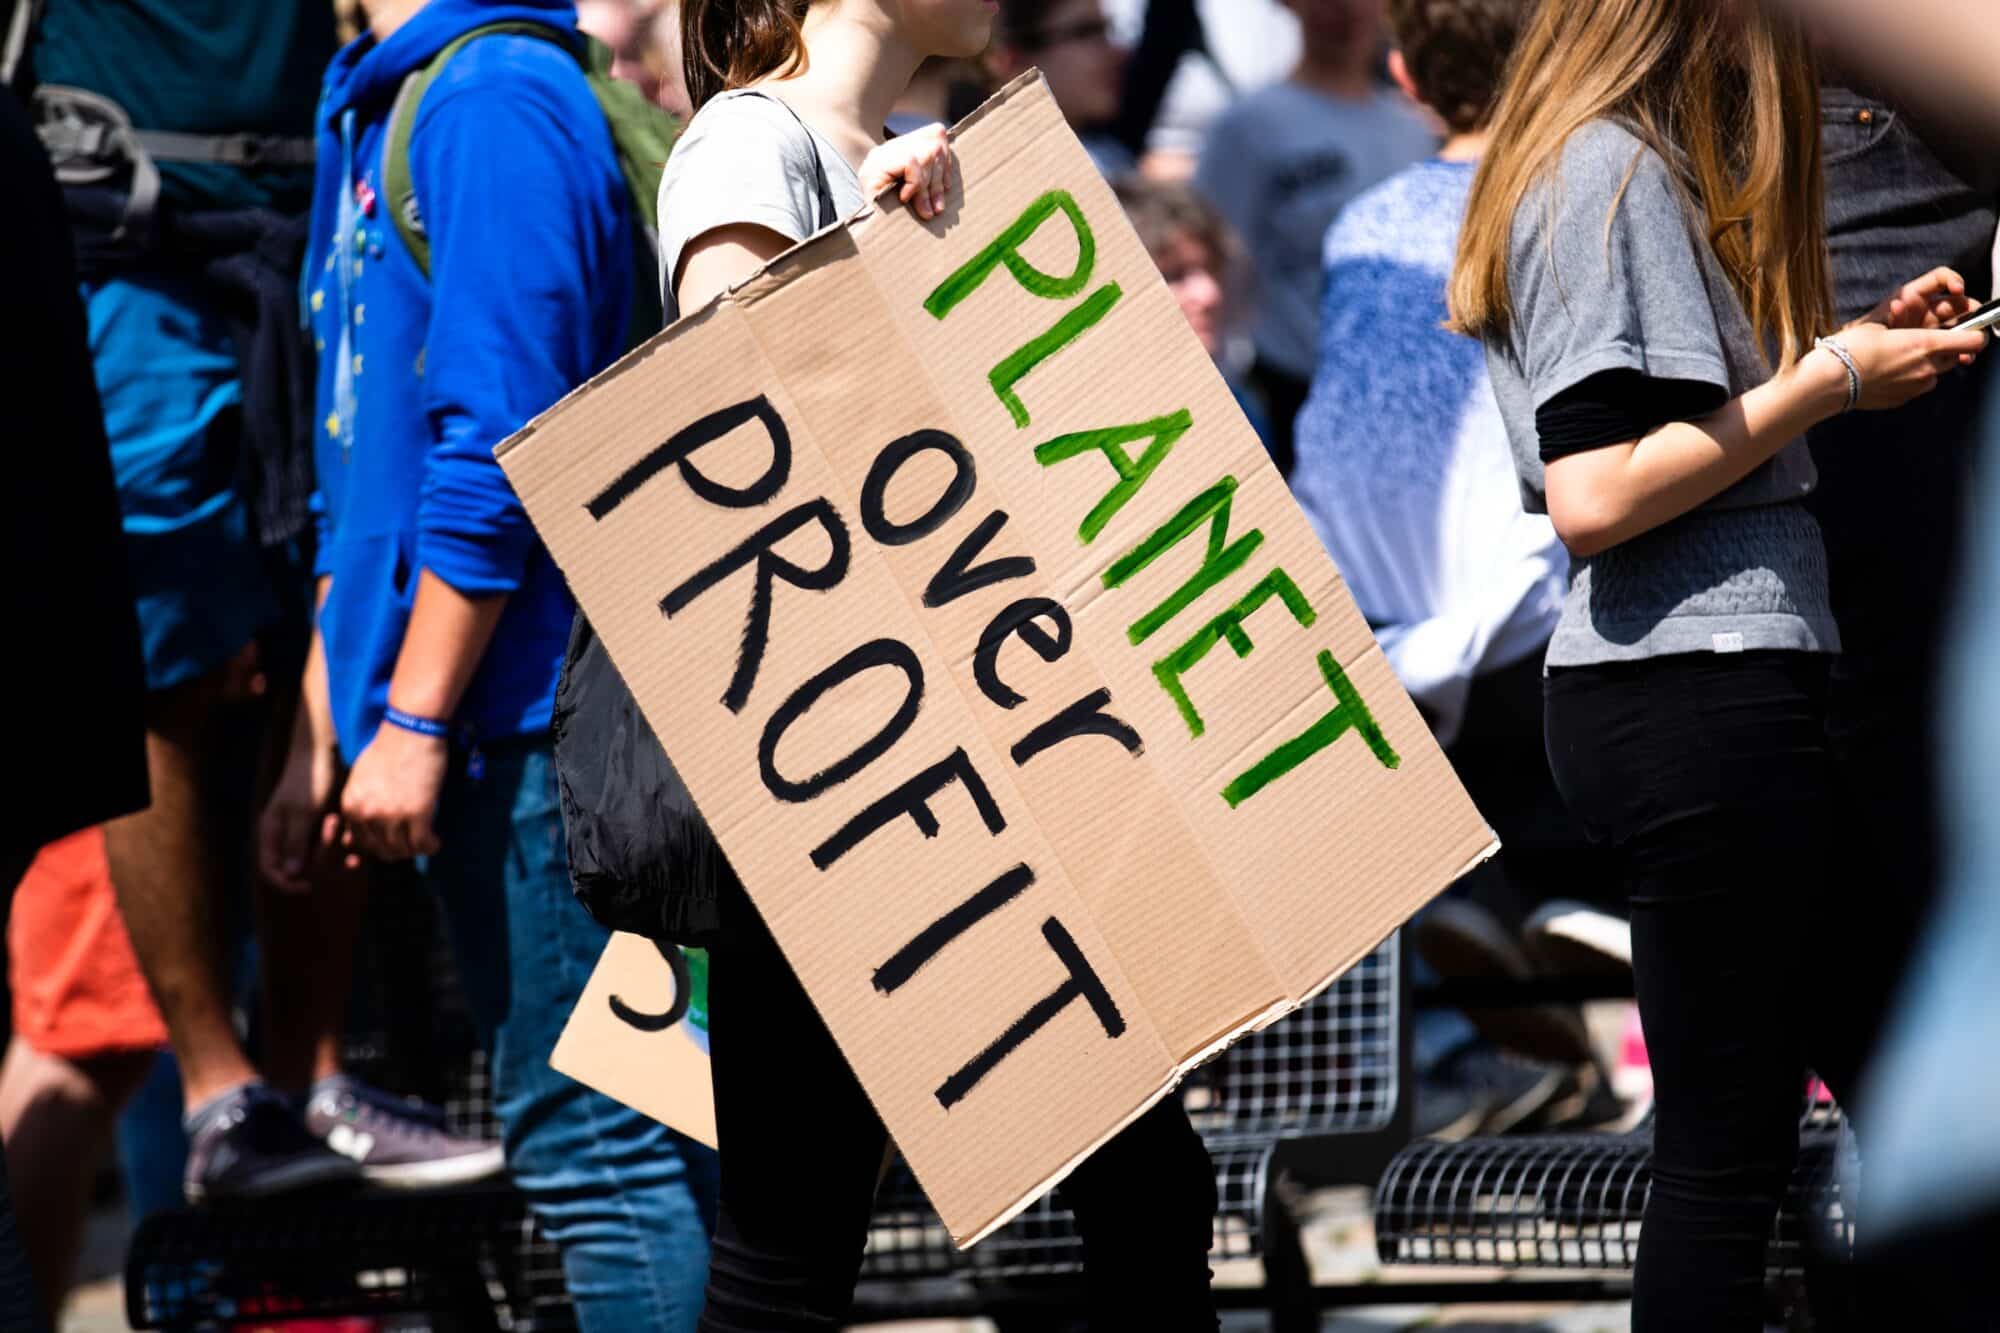 A climate protestor holds a cardboard sign that reads "plant over profit".